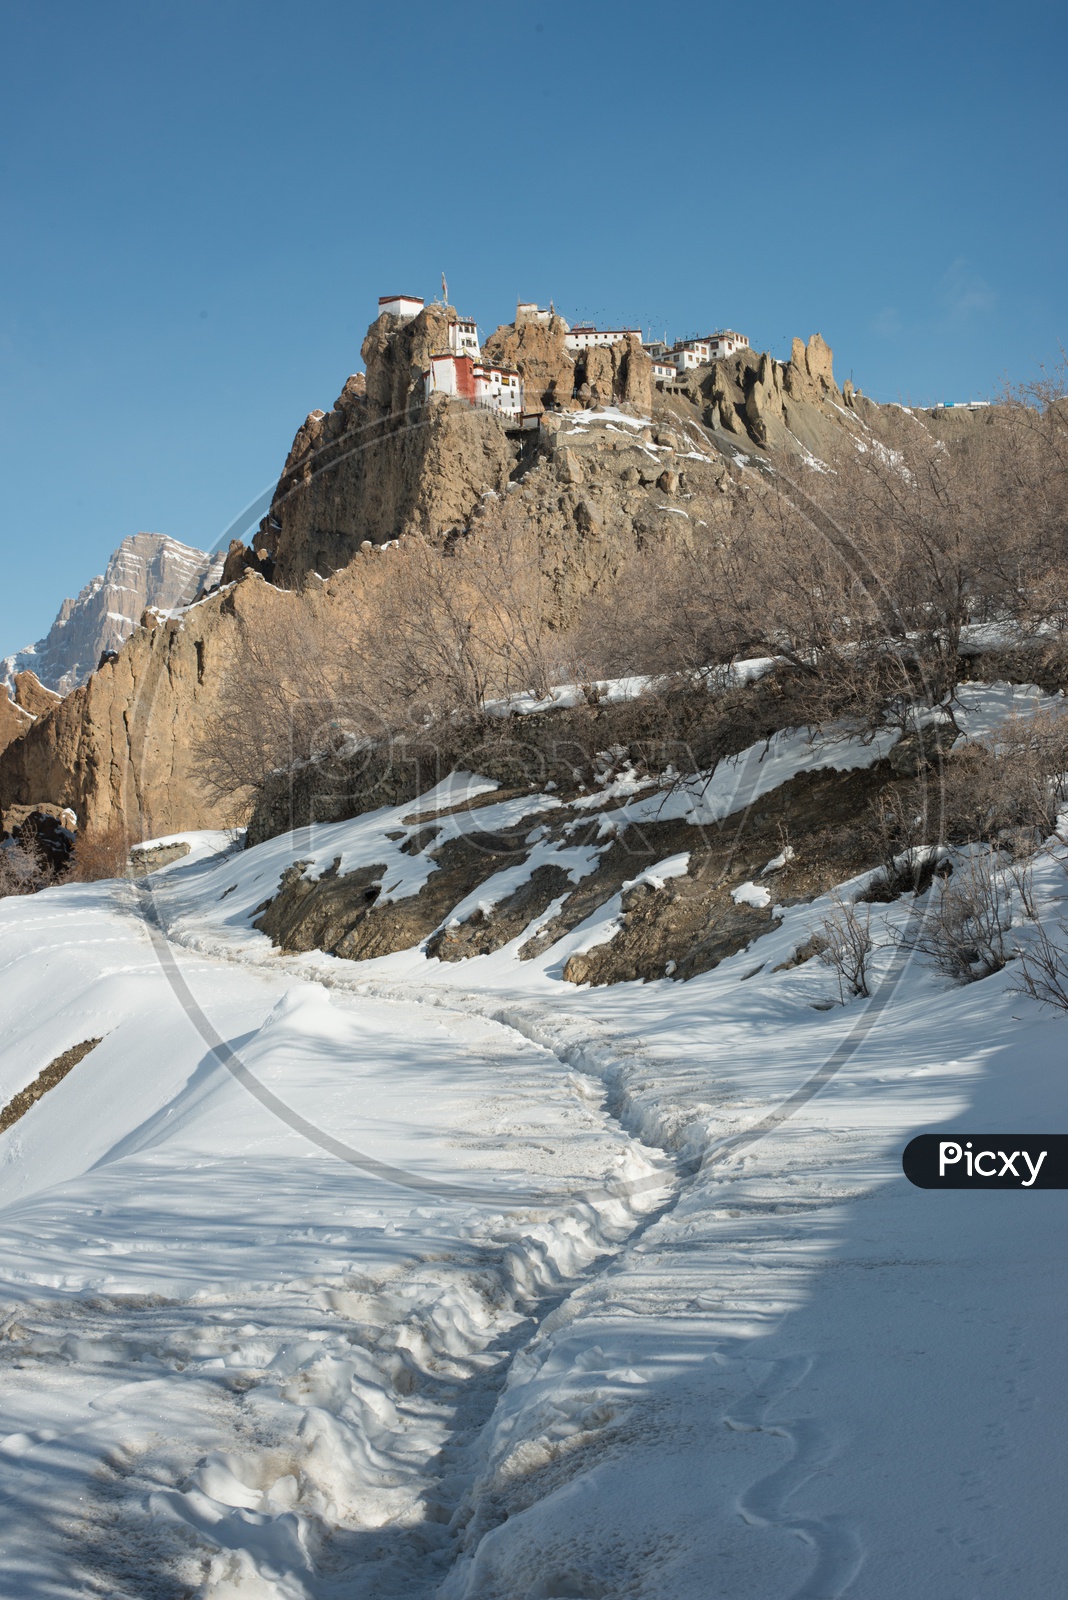 Dhankar Monastery on Mountain Top Surrounded by Snow in Winter Seasons